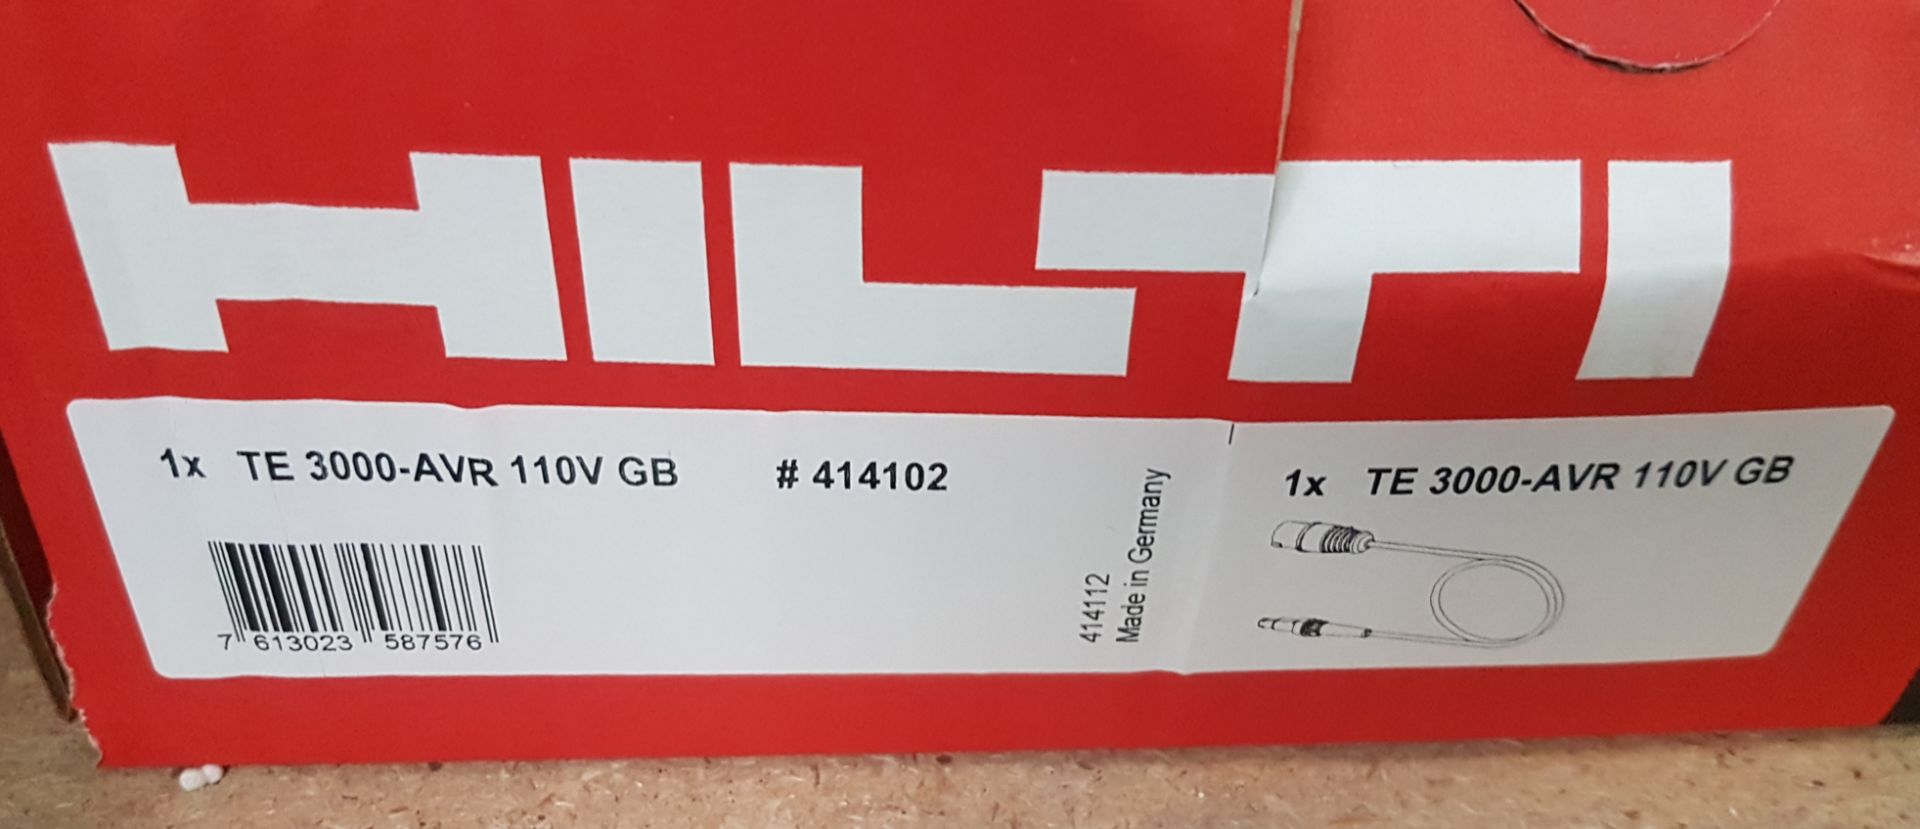 1 x Hilti TE3000-AVR 110v Cable With Original Box - CL303 - Location: North Wales LL14 - Image 2 of 3